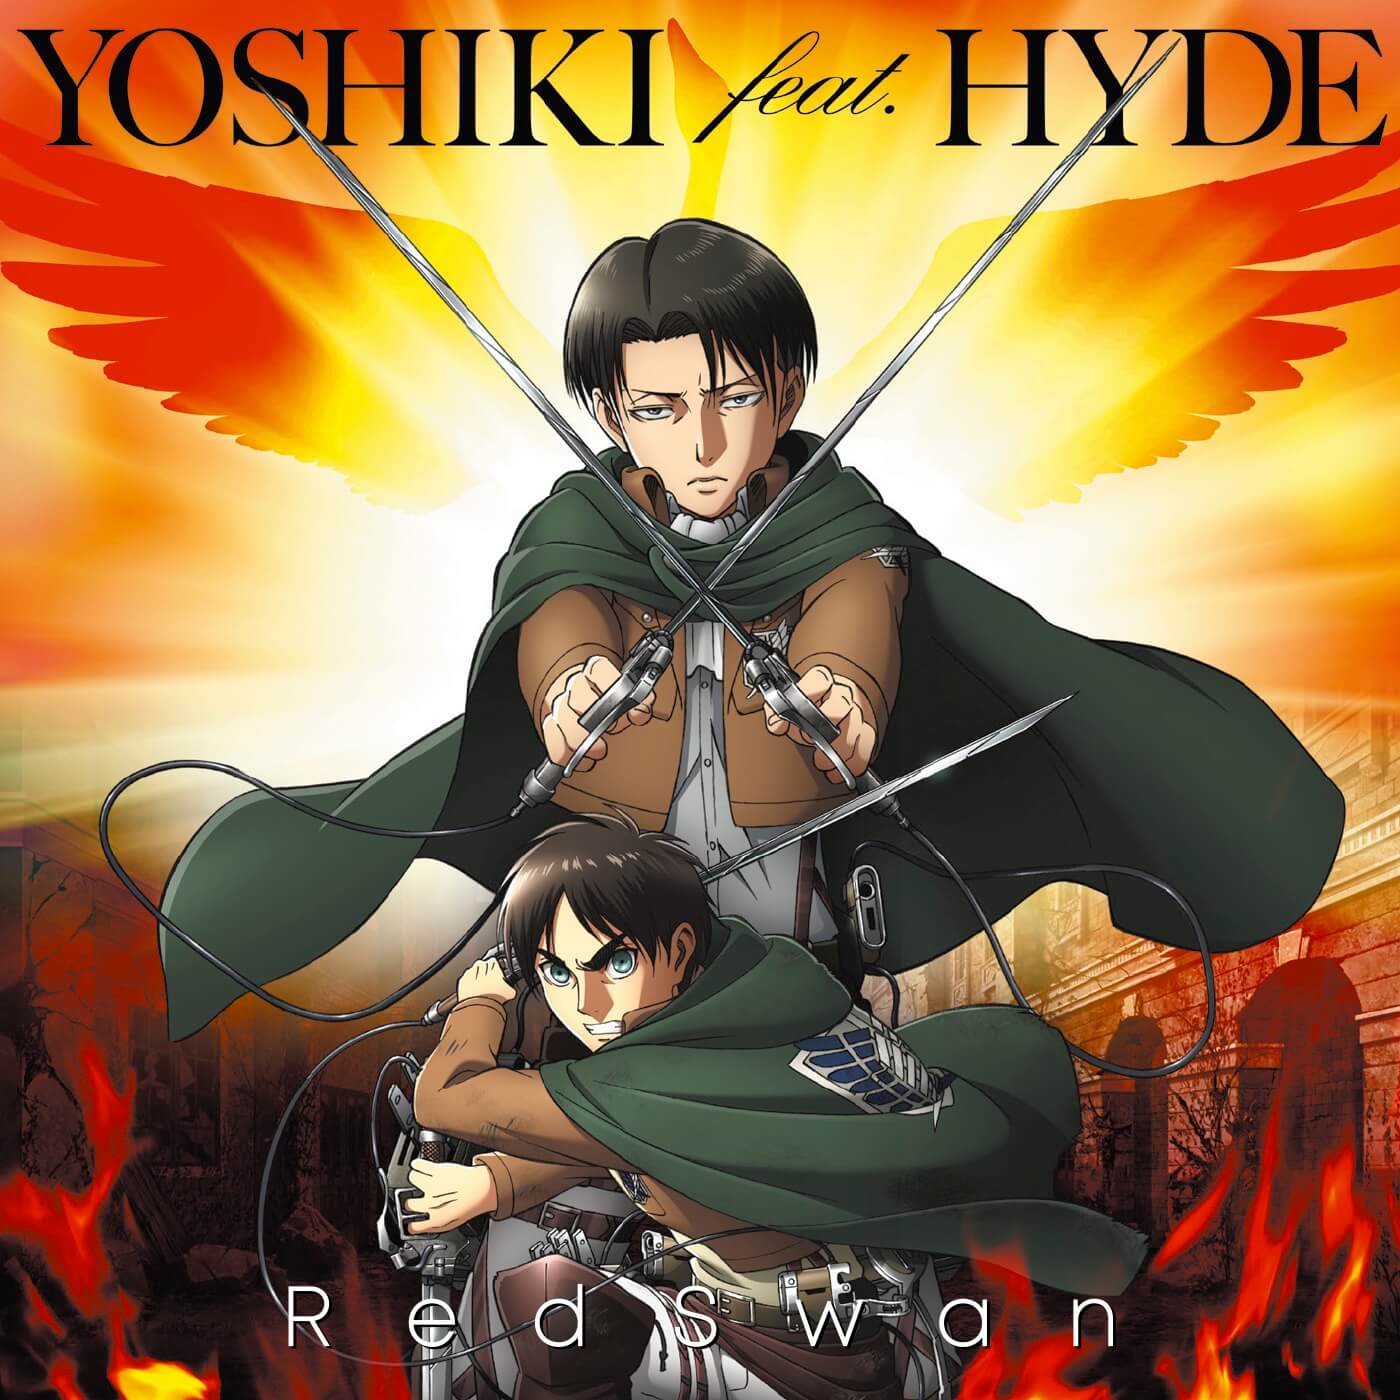 Attack On Titan Season 3 Opening Red Swan By Yoshiki Feat Hyde To Get Cd Release On October 3 Moshi Moshi Nippon もしもしにっぽん